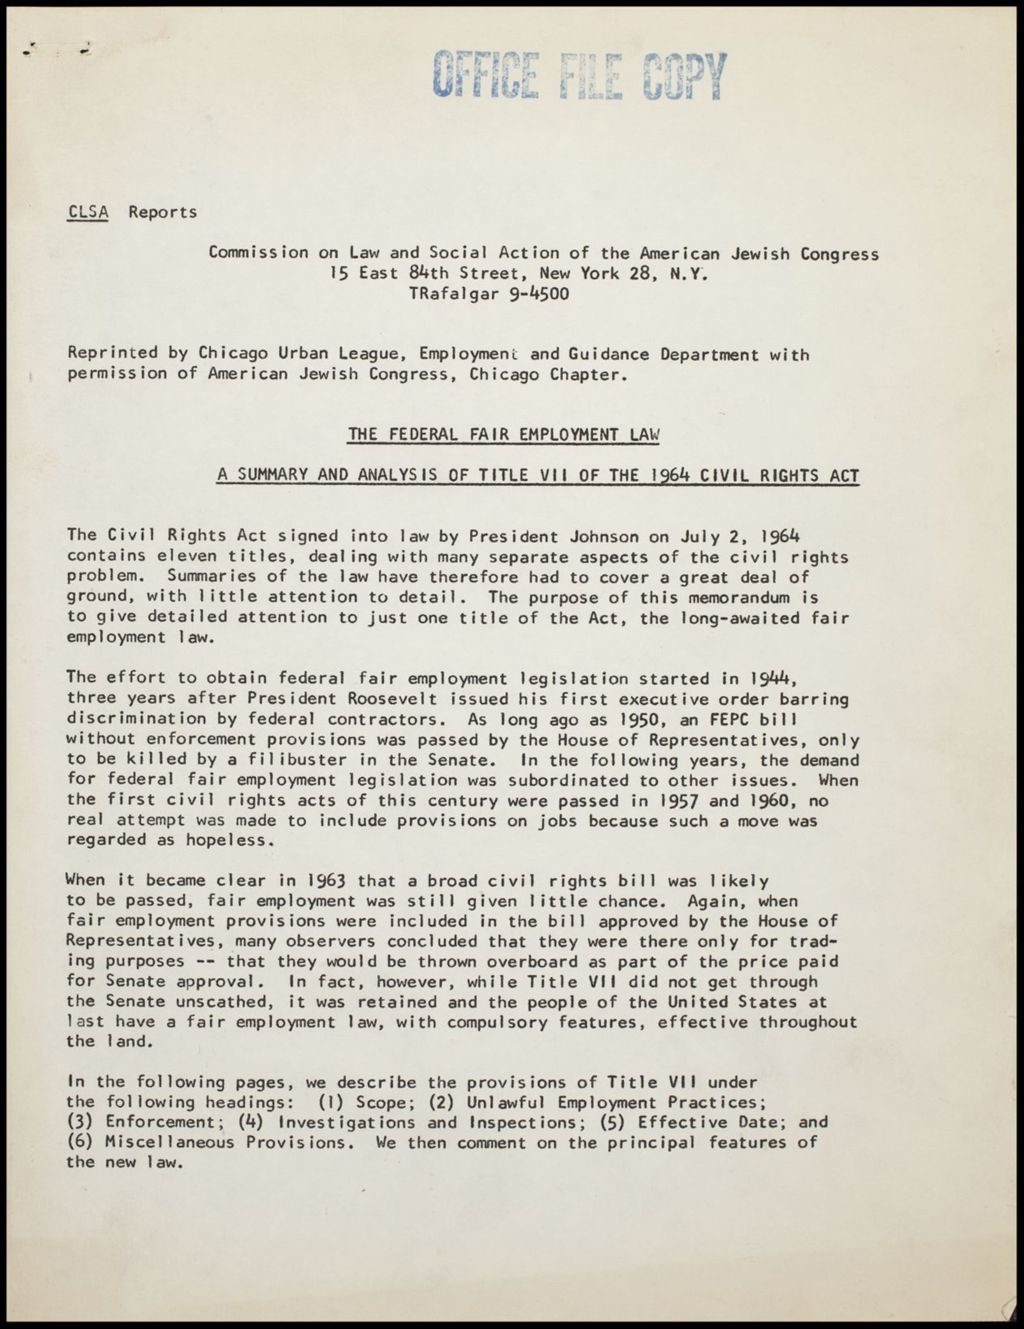 Miniature of Summary and Analysis Civil Rights Act and Challenge from the Nixon Administration, 1969 (Folder III-2938)